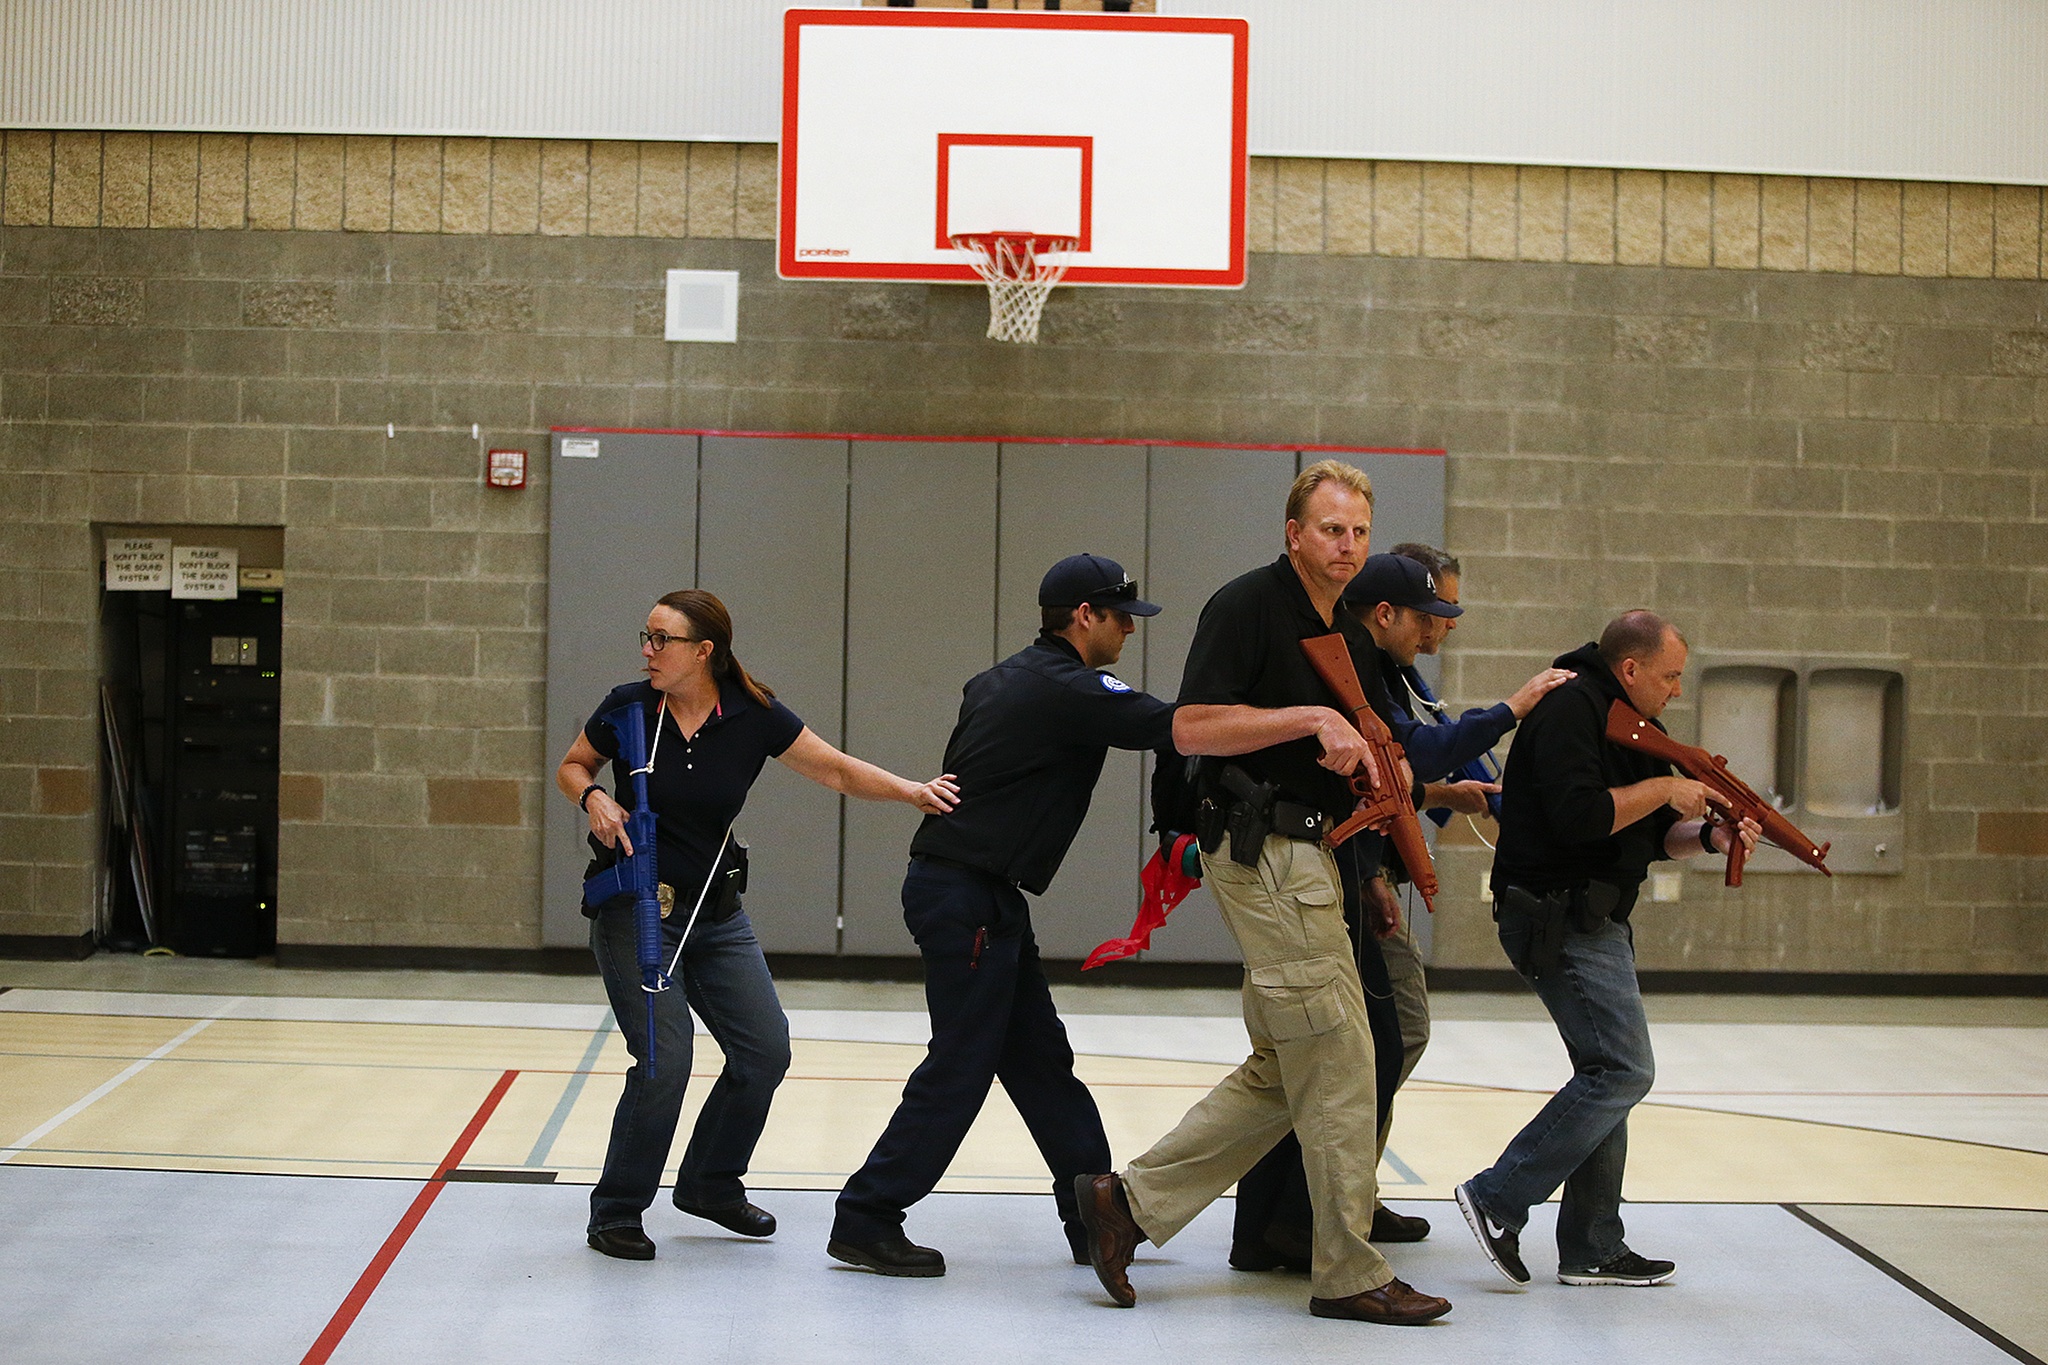 A group of Marysville police practice a “diamond” formation to protect Marysville fire department personnel during training at Grove Elementary School in Marysville on Aug. 9. Under new protocol, paramedics will be escorted by law enforcement into a “warm zone”, an area checked by but still considered dangerous by police, to provide critical care within the first hour of a mass casualty event. (Ian Terry / The Herald)